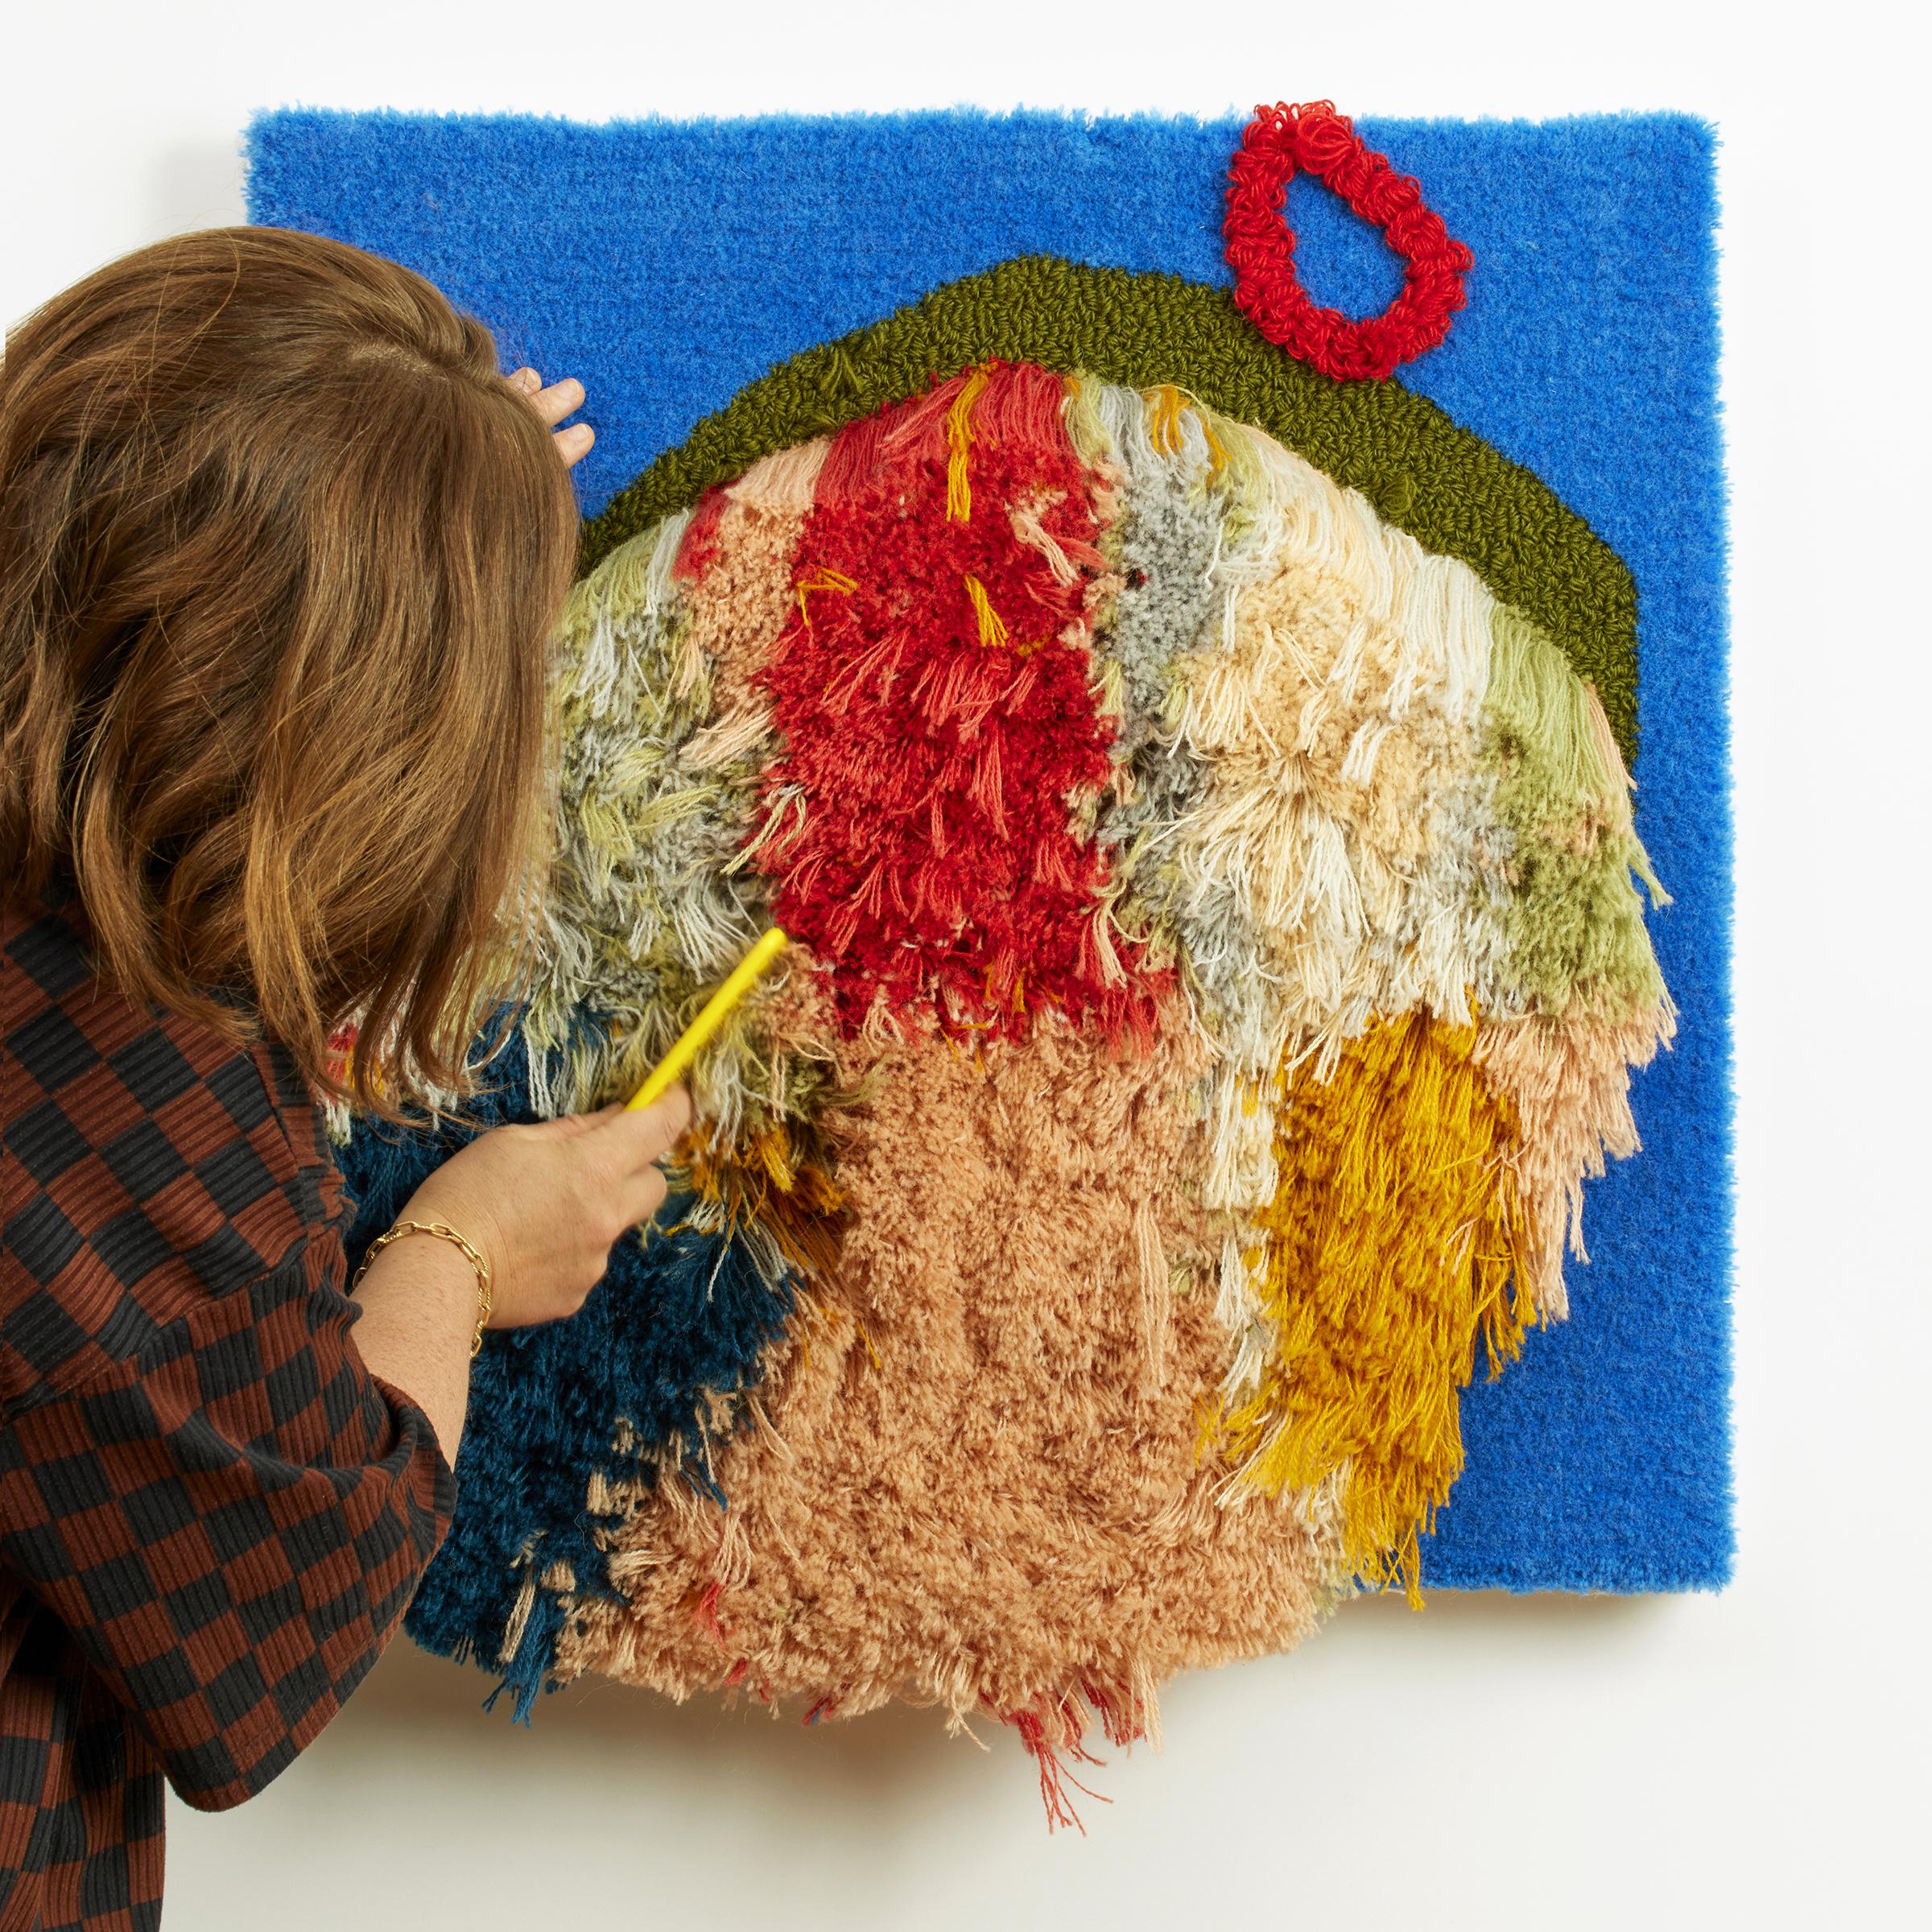 'Jelly Roll' - contemporary fiber art, texture, pattern, blue, tufting - Sculpture by Trish Andersen